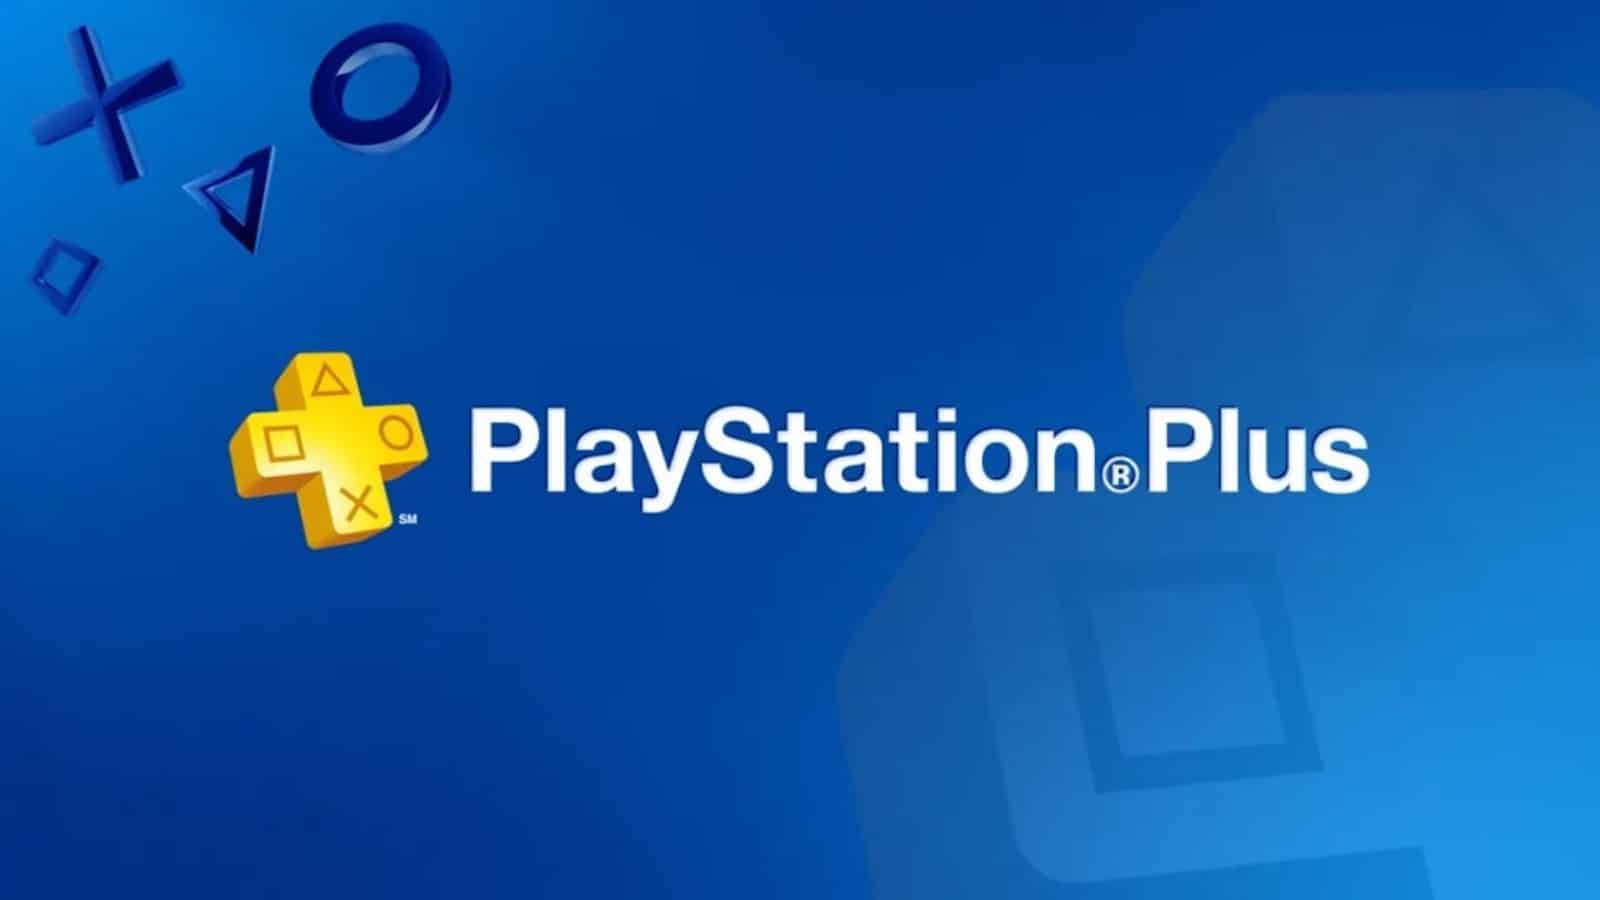 PS Plus Free Games For December 2021 Revealed